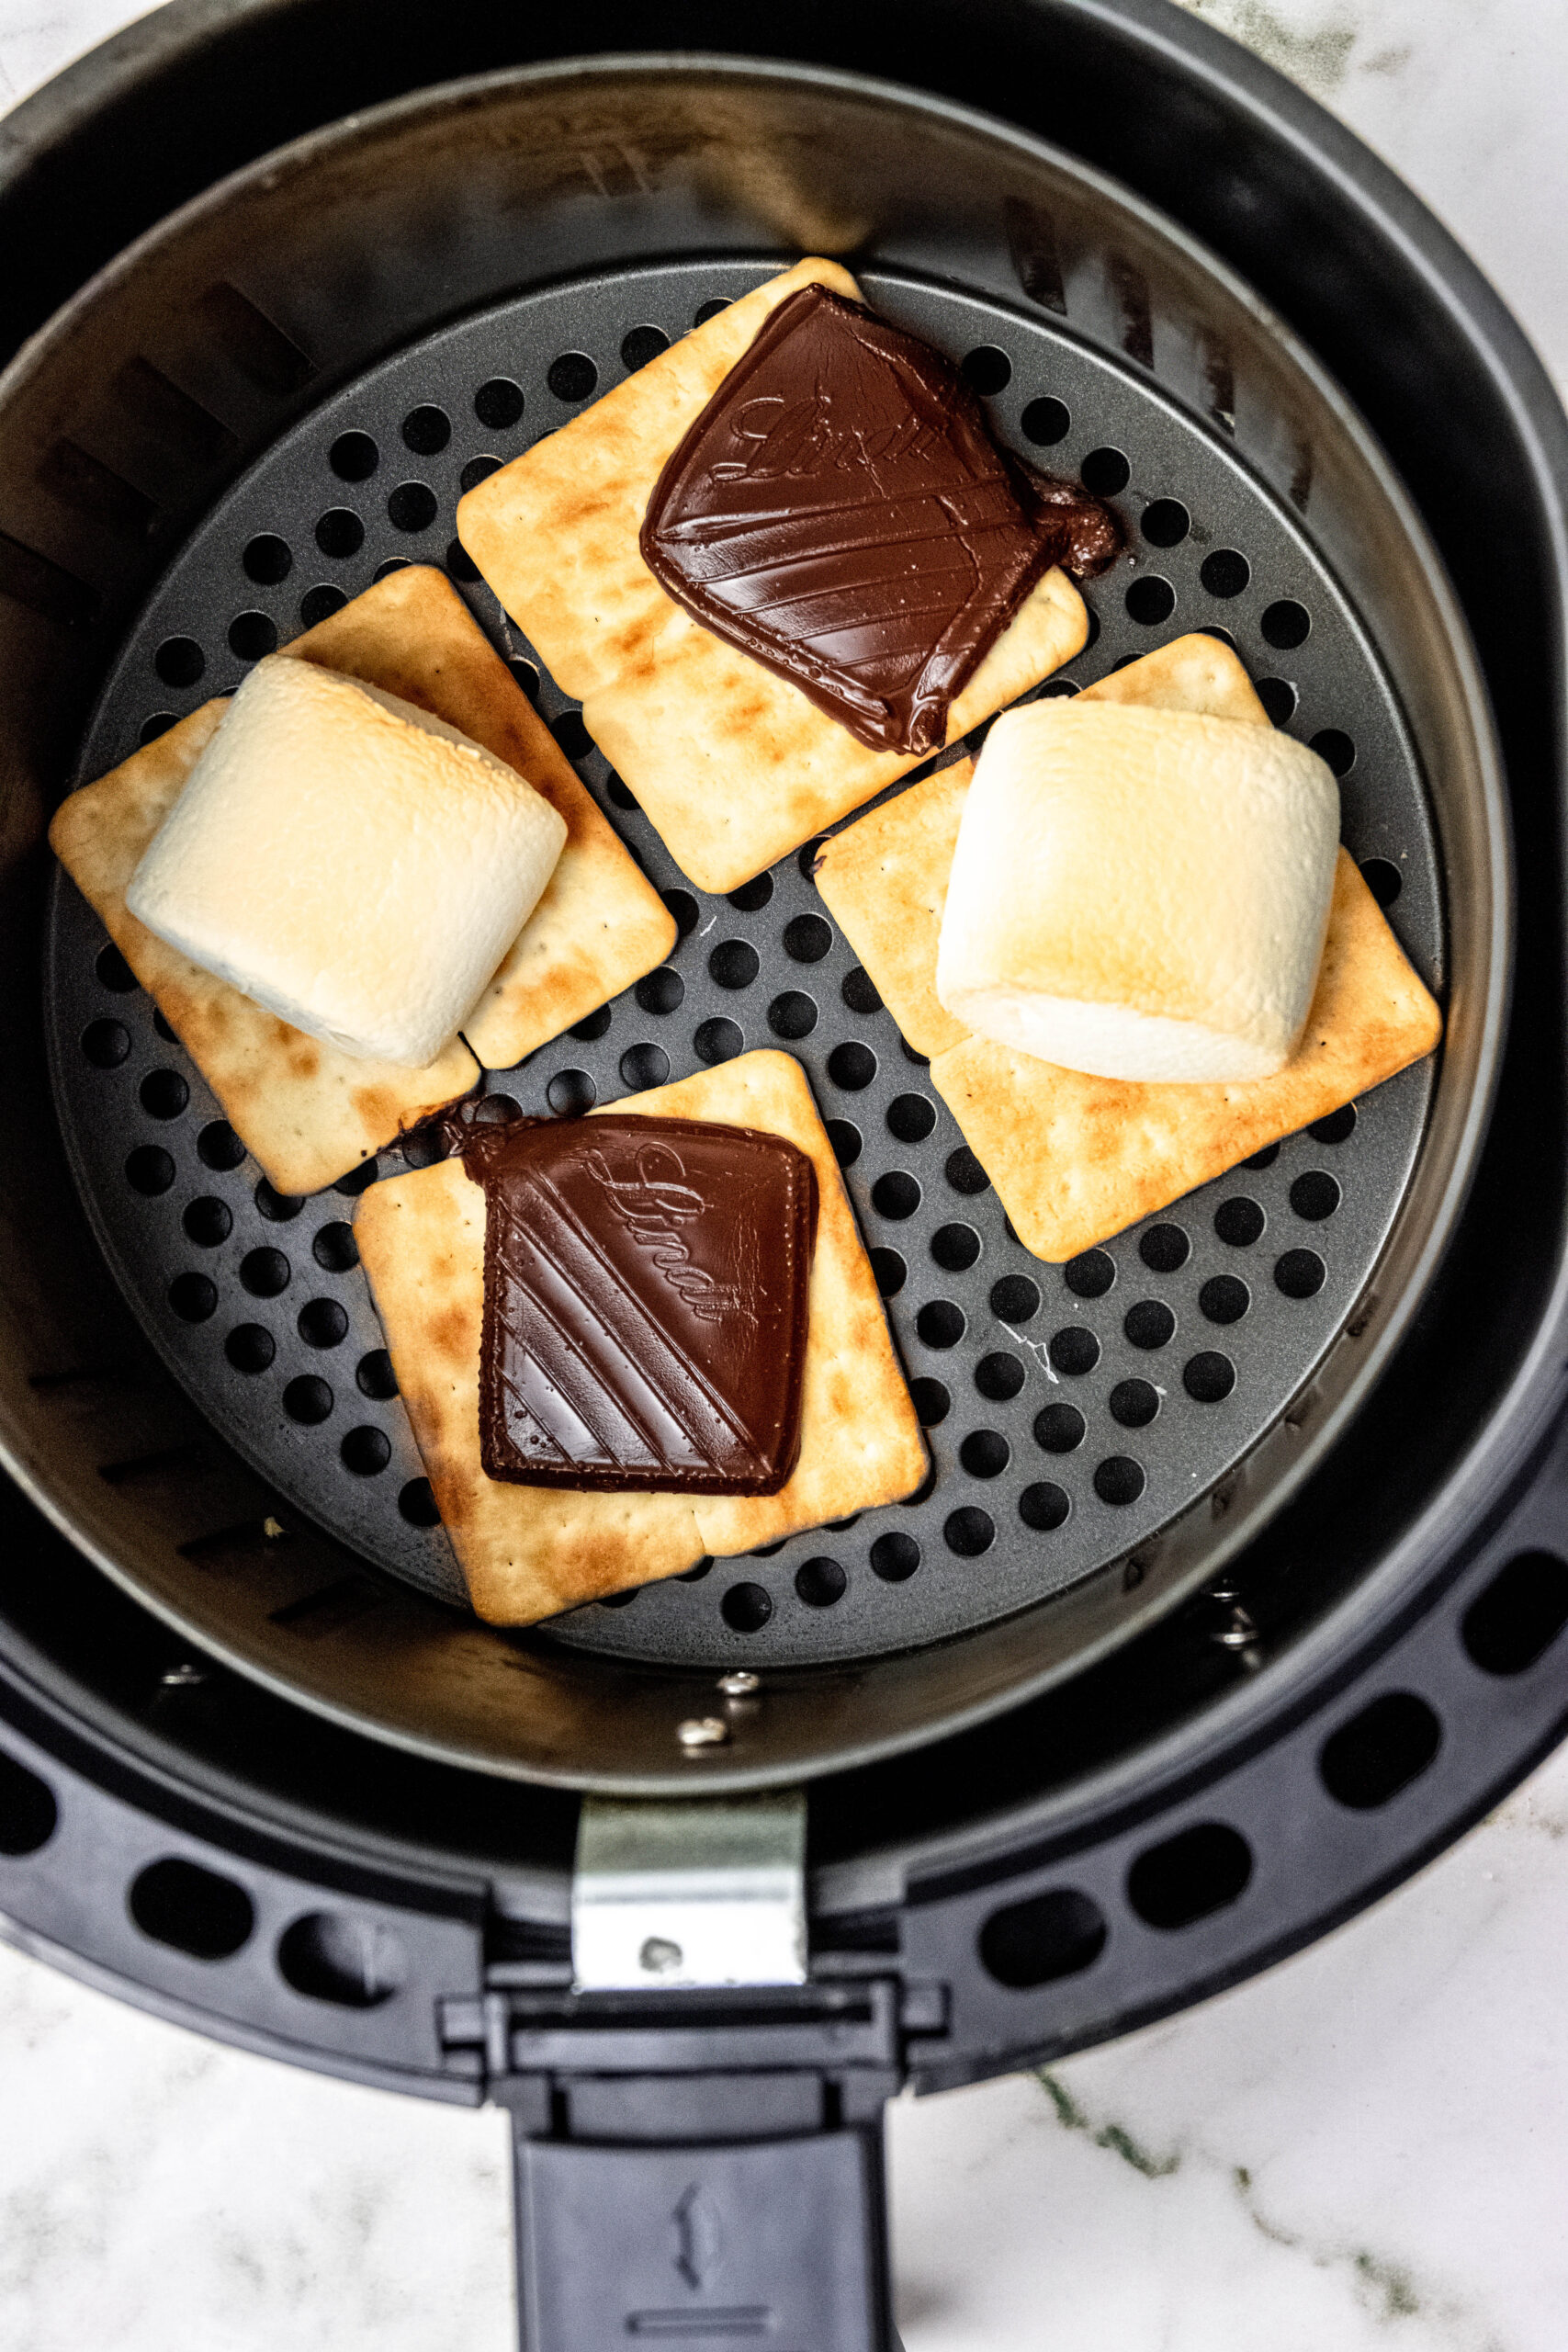 Overhead of air fryer basket with smores ingredients.